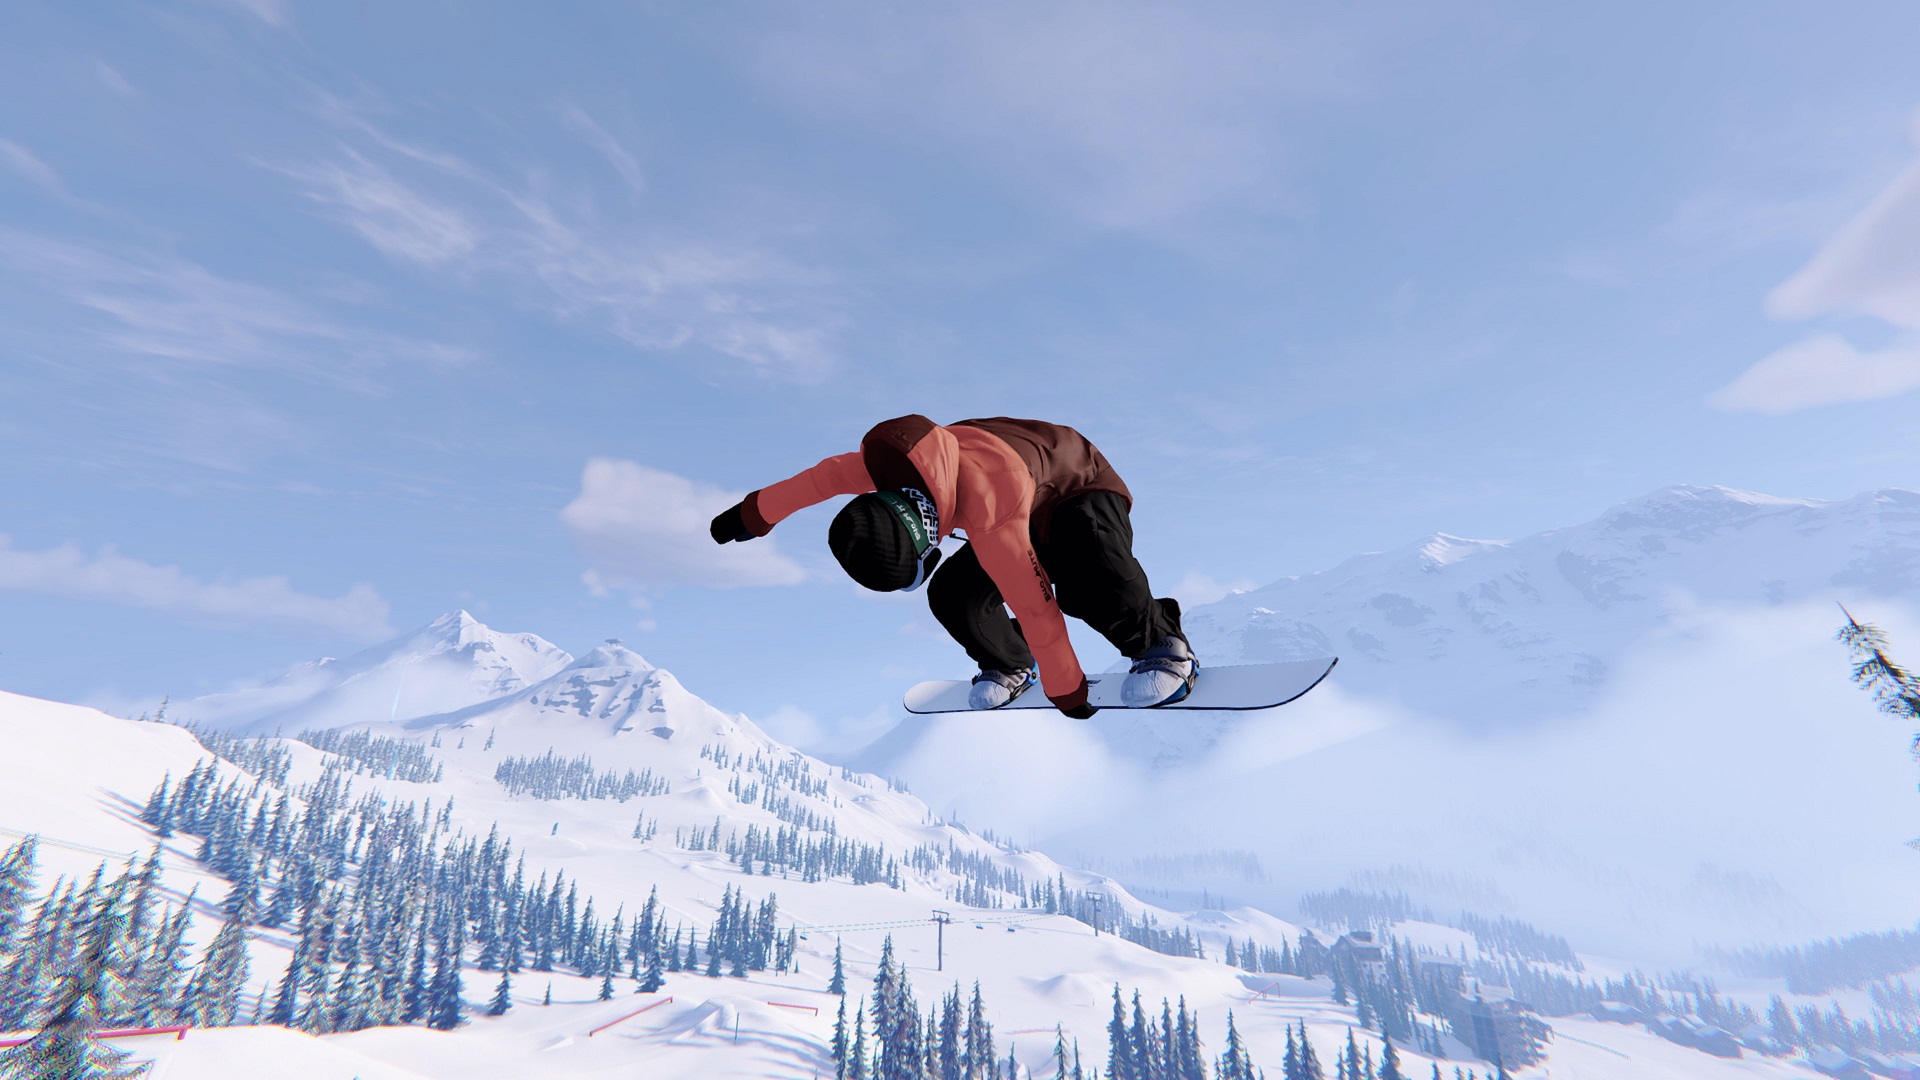 Shredders Launches in December 2021